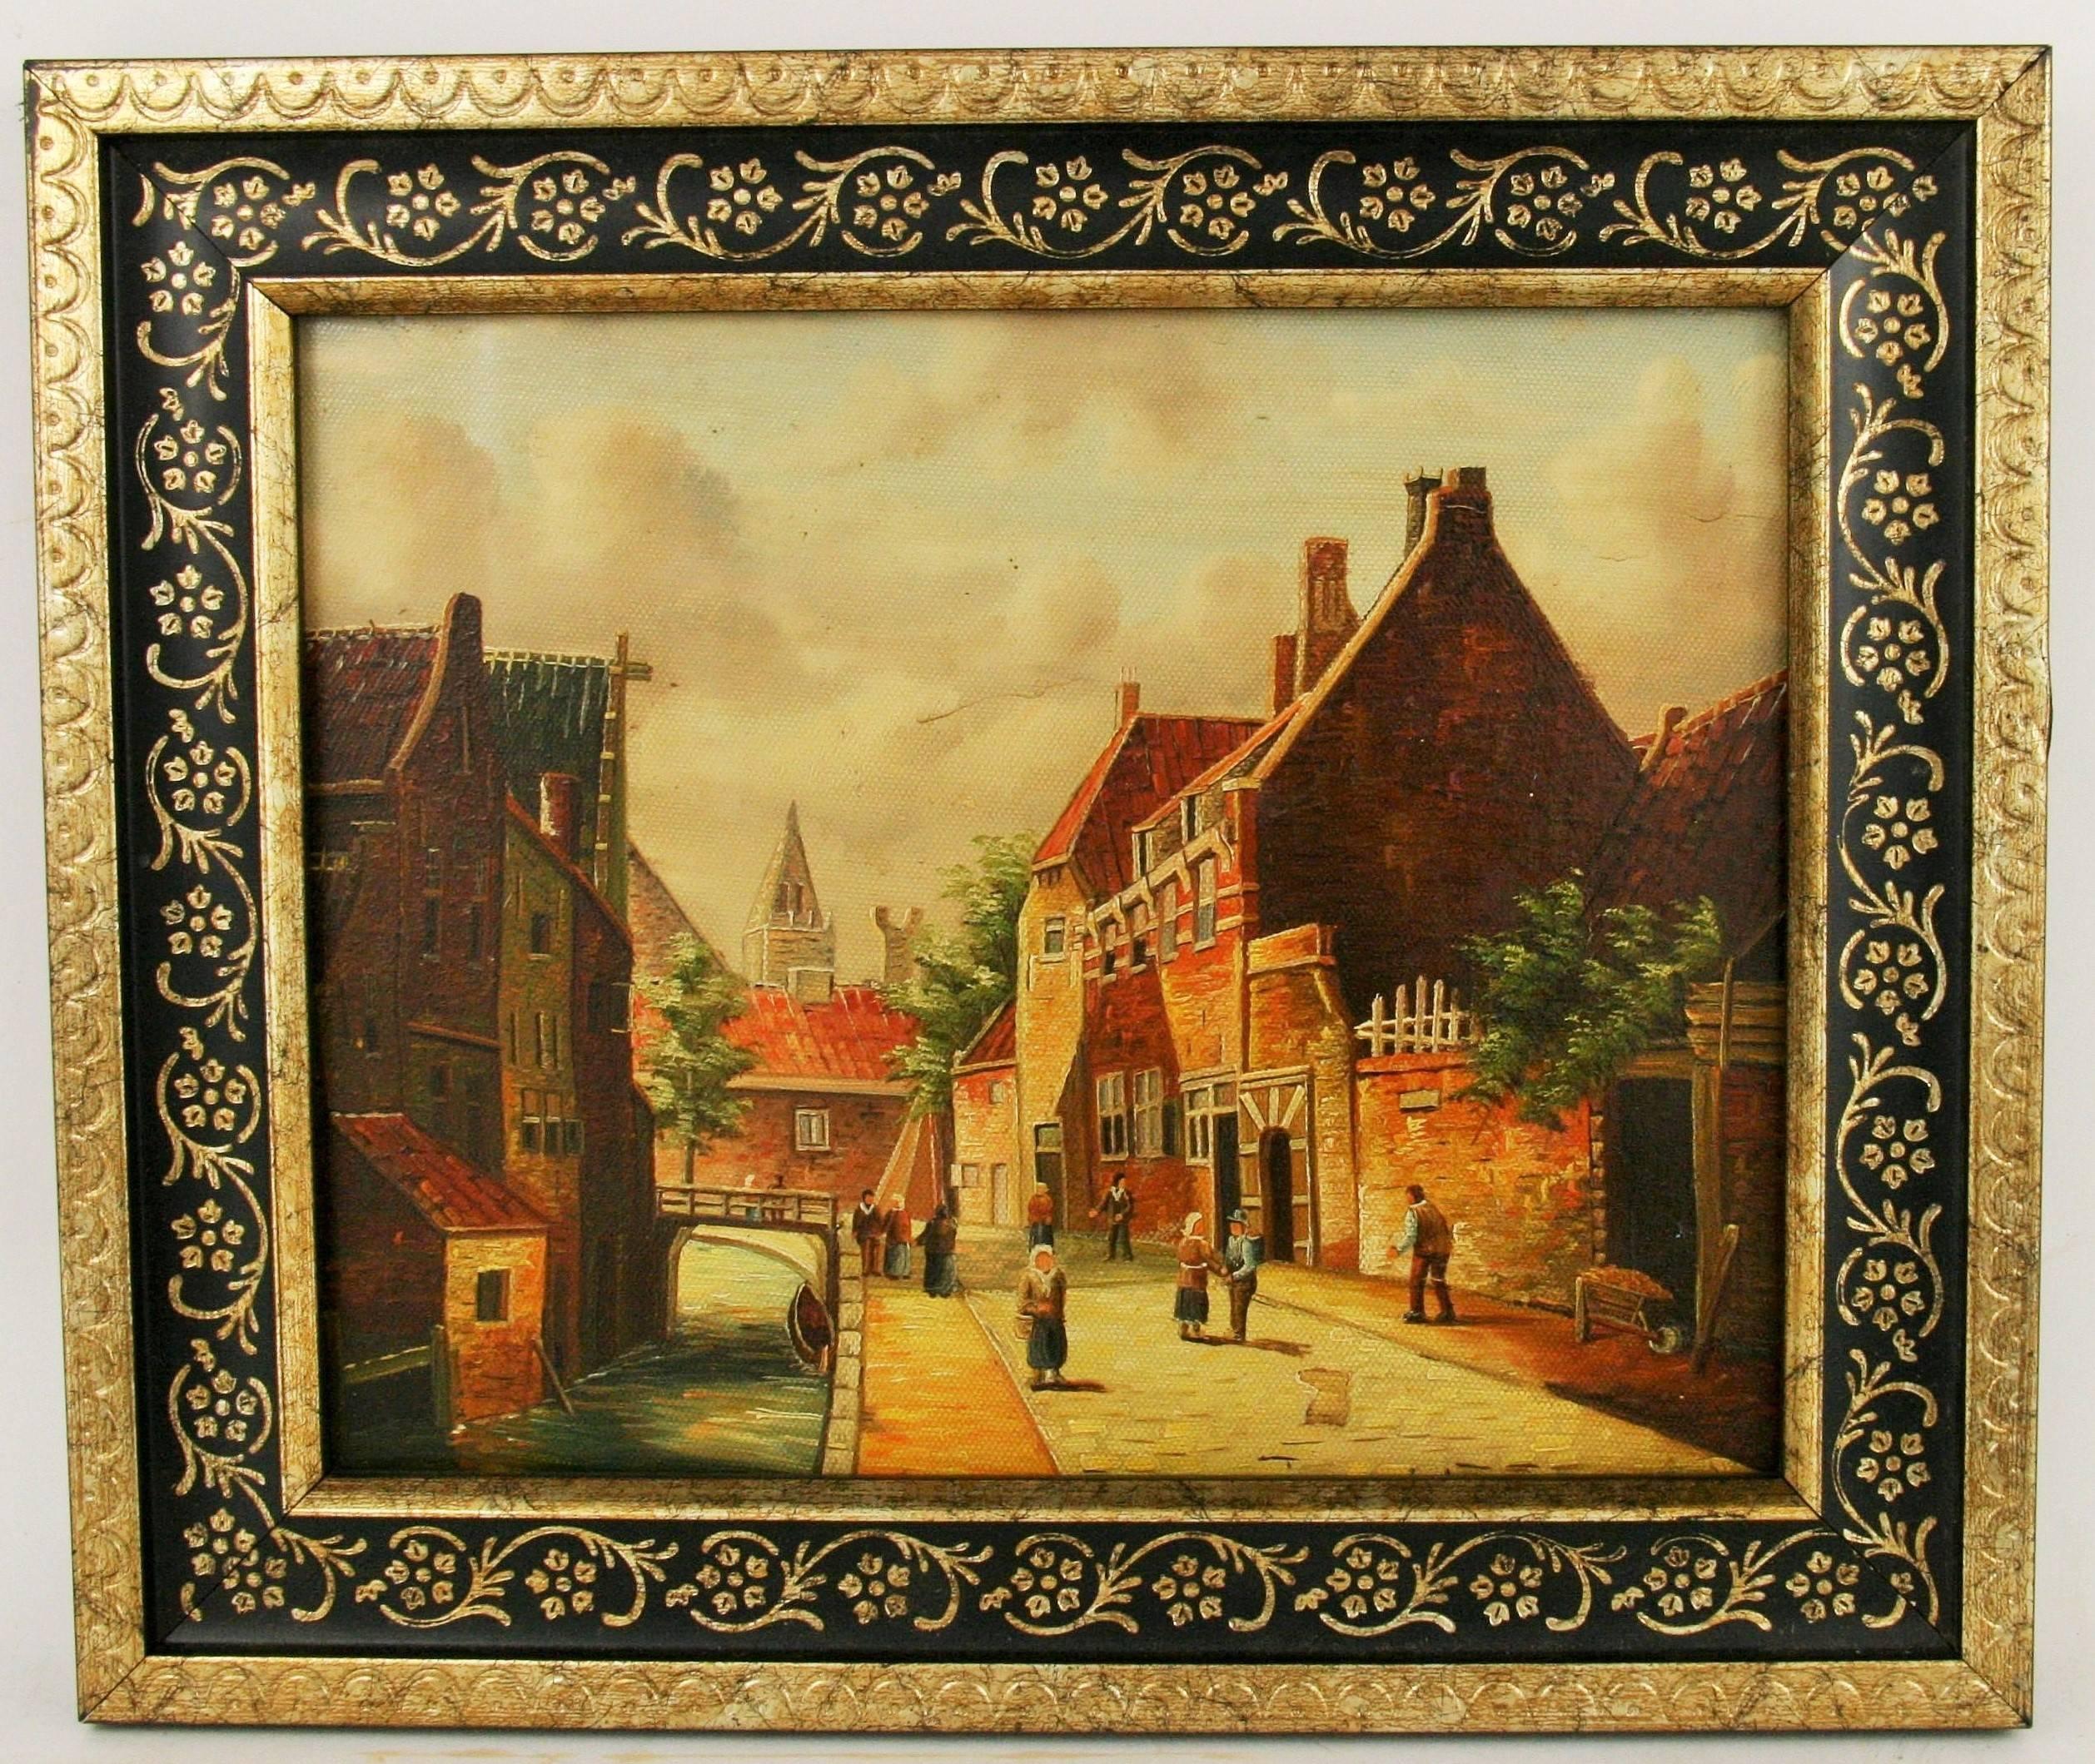  Impressionist Old Dutch European  Street Scene  Painting - Brown Figurative Painting by Unknown